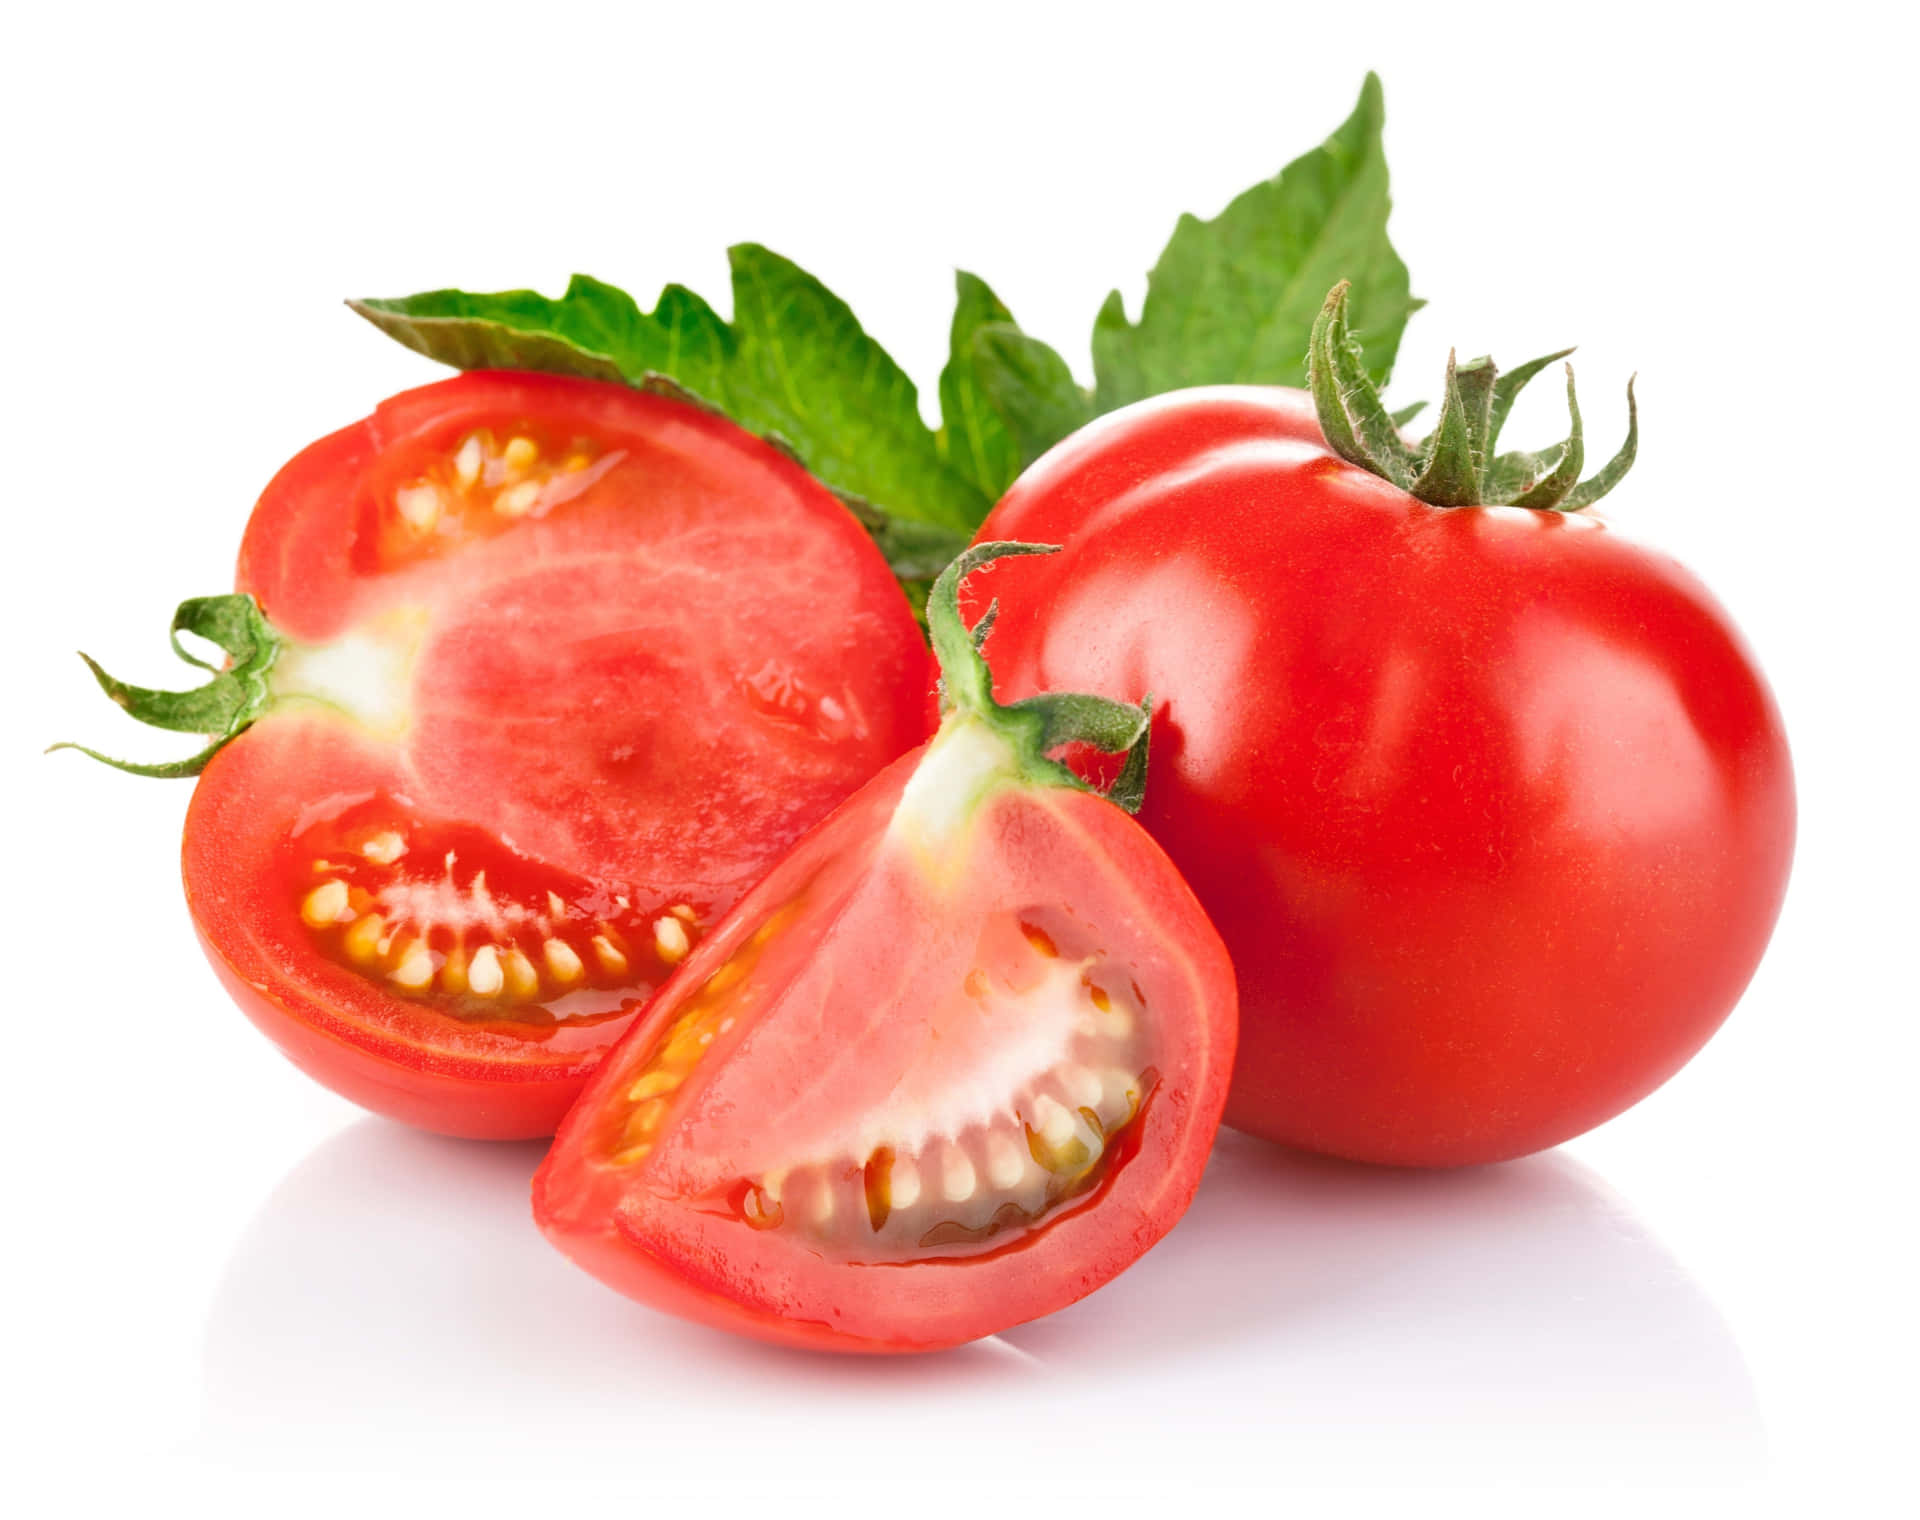 Vibrant, Red Tomatoes